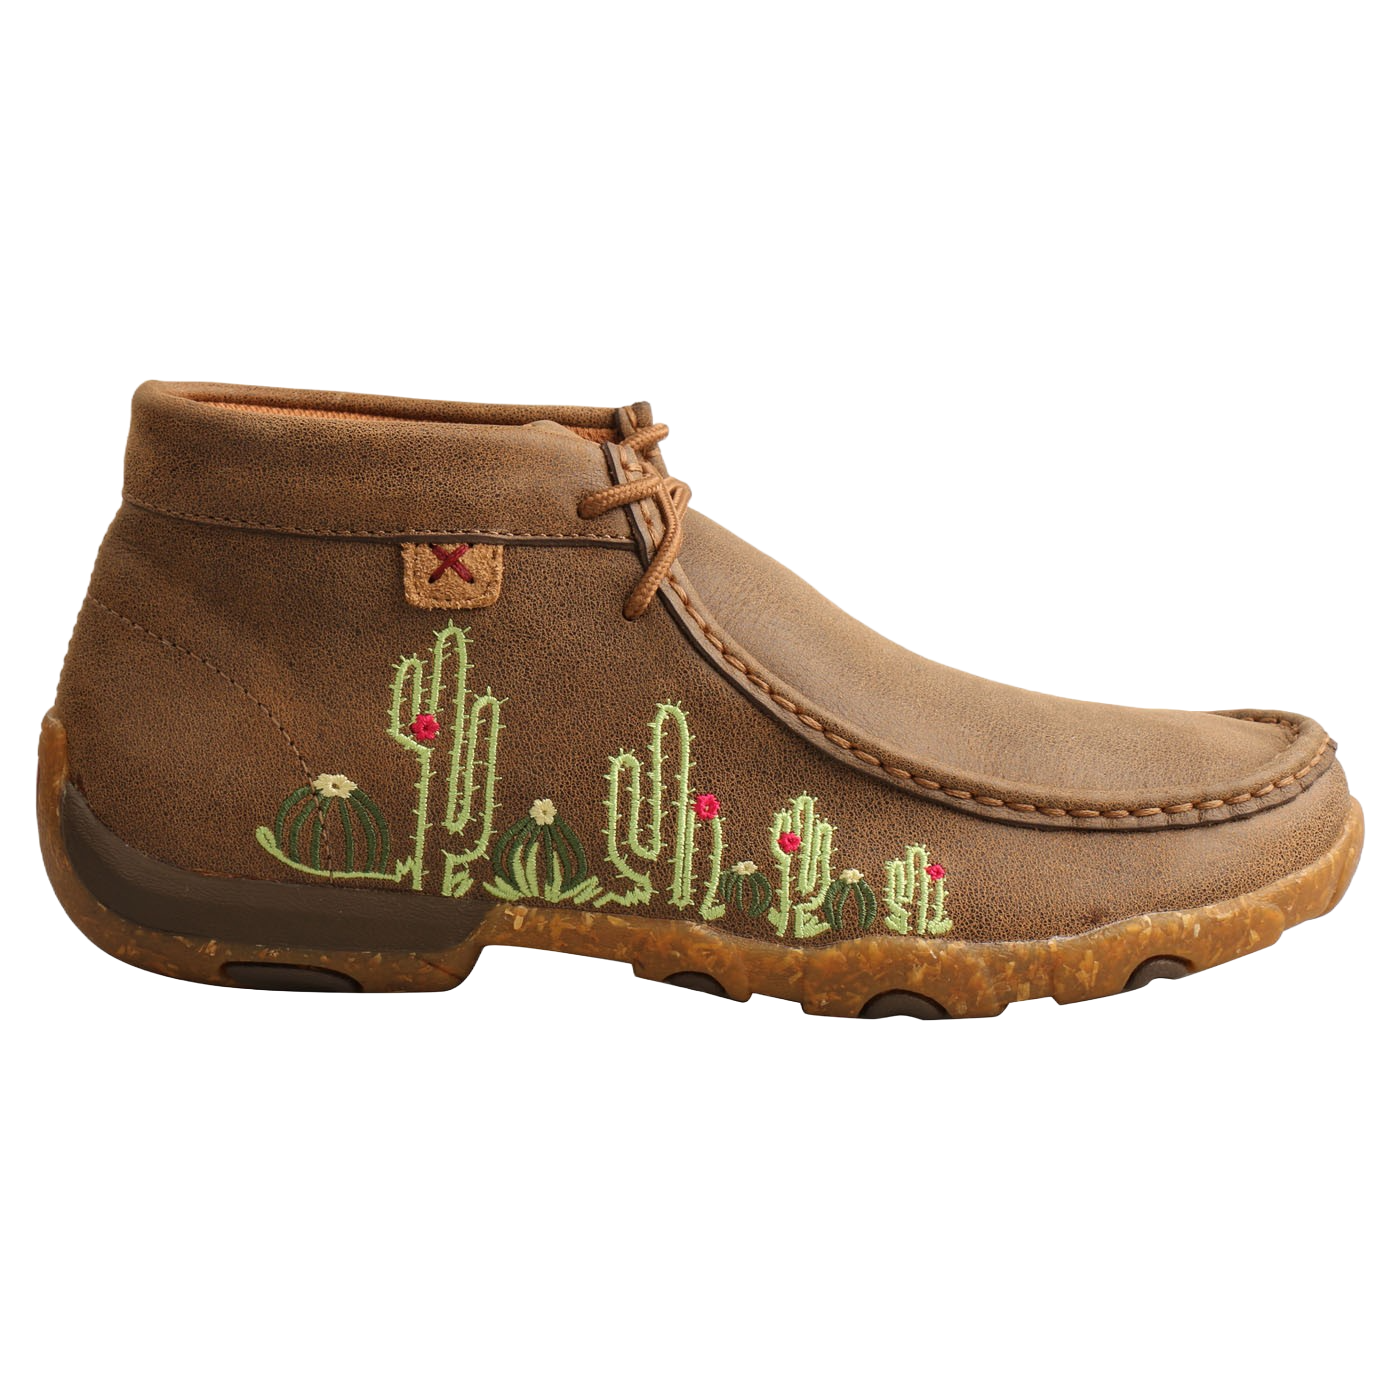 Twisted X Ladies Chukka Driving Moc Cactus Embroidery Shoes WDM0145